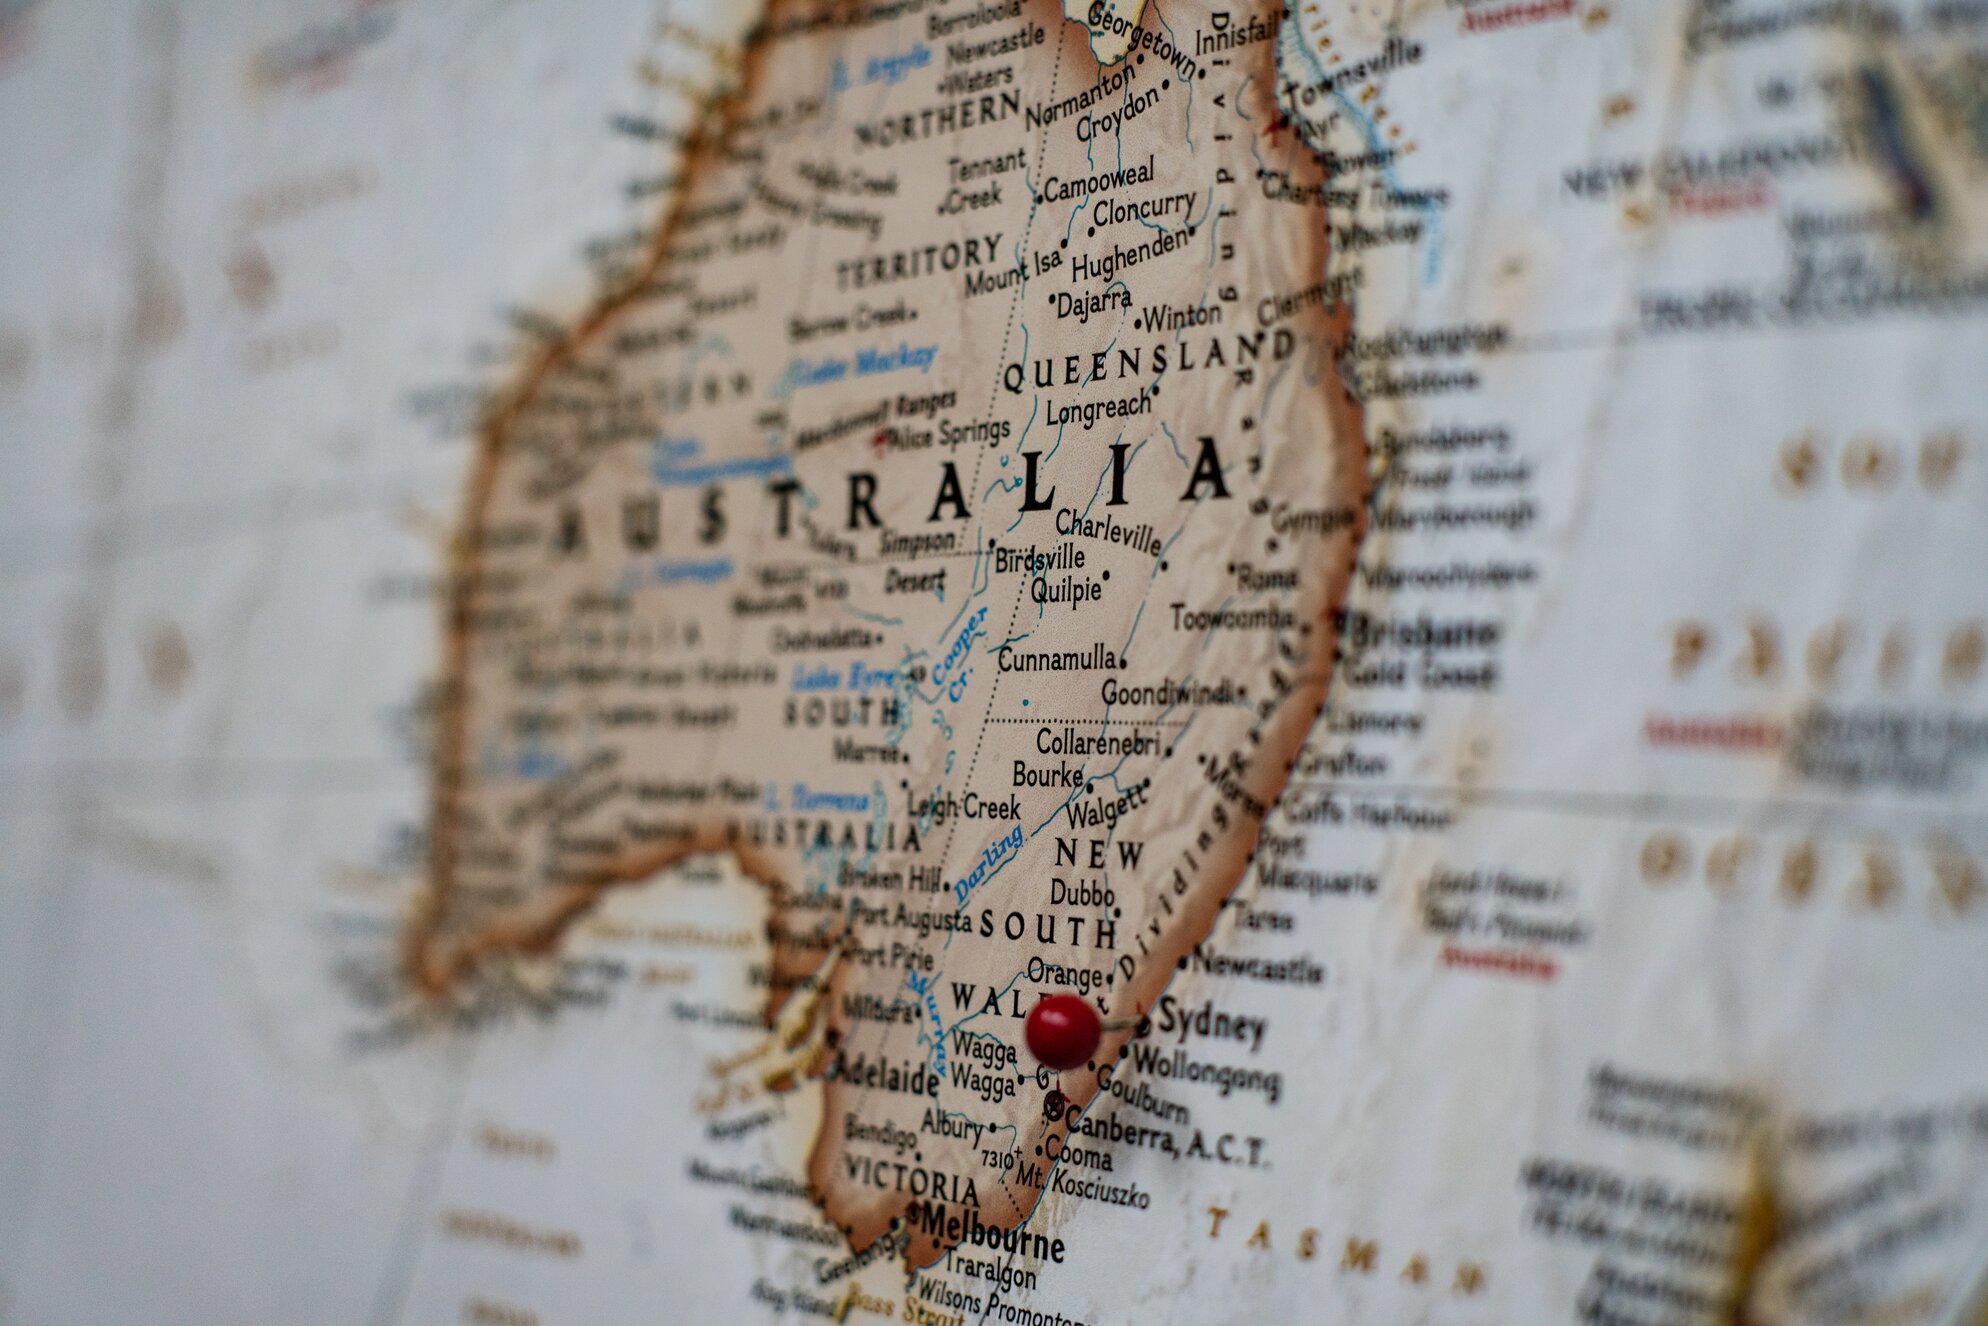 The Department of Foreign Affairs and Trade (DFAT), as a part of the foreign policy white paper, is looking into ways to support to service sector in Australia